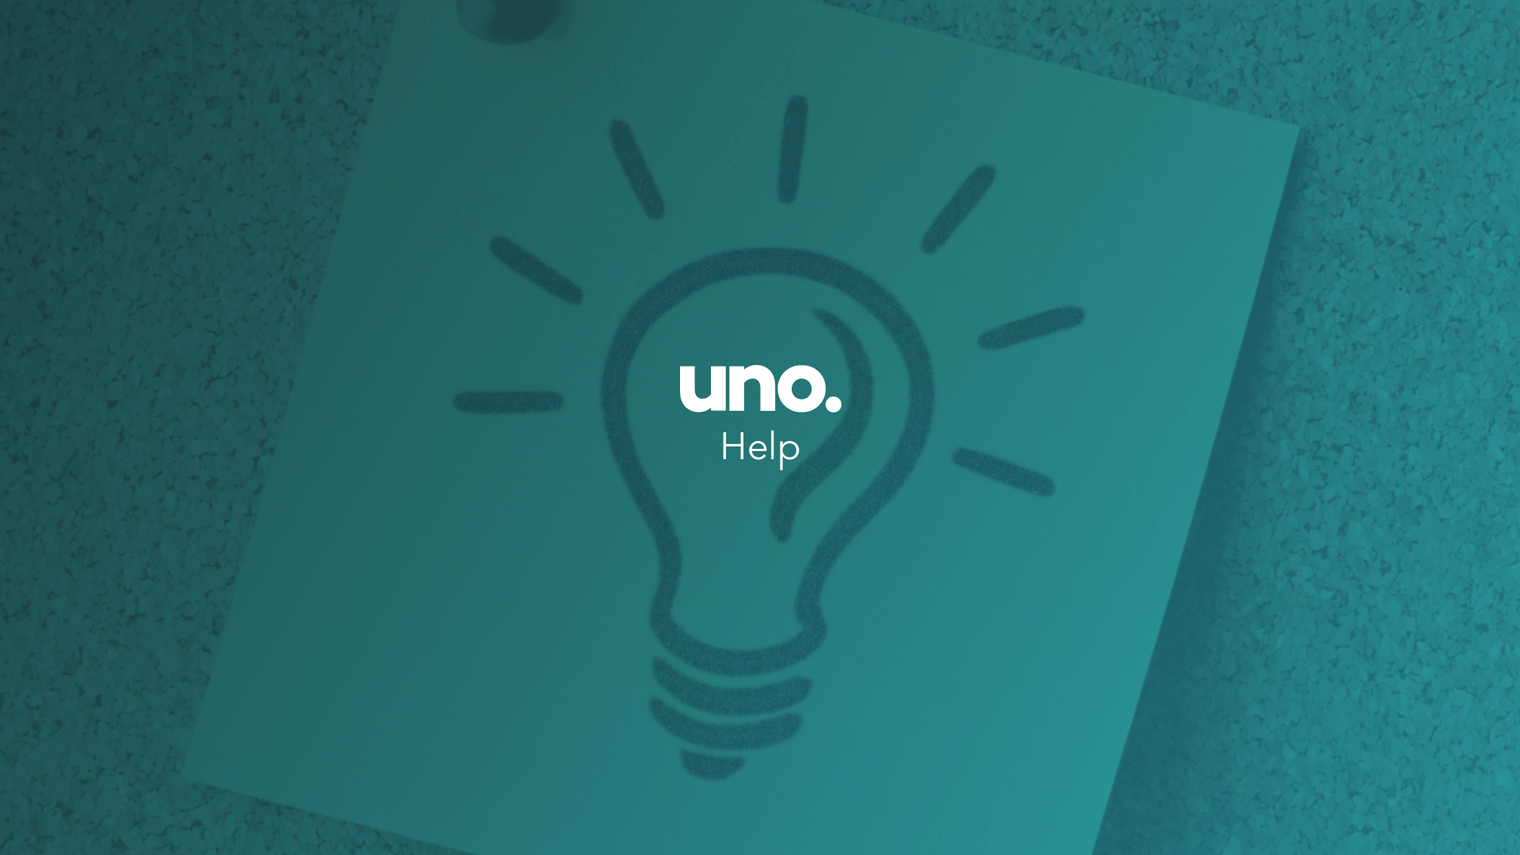 How is uno different from a mortgage broker?